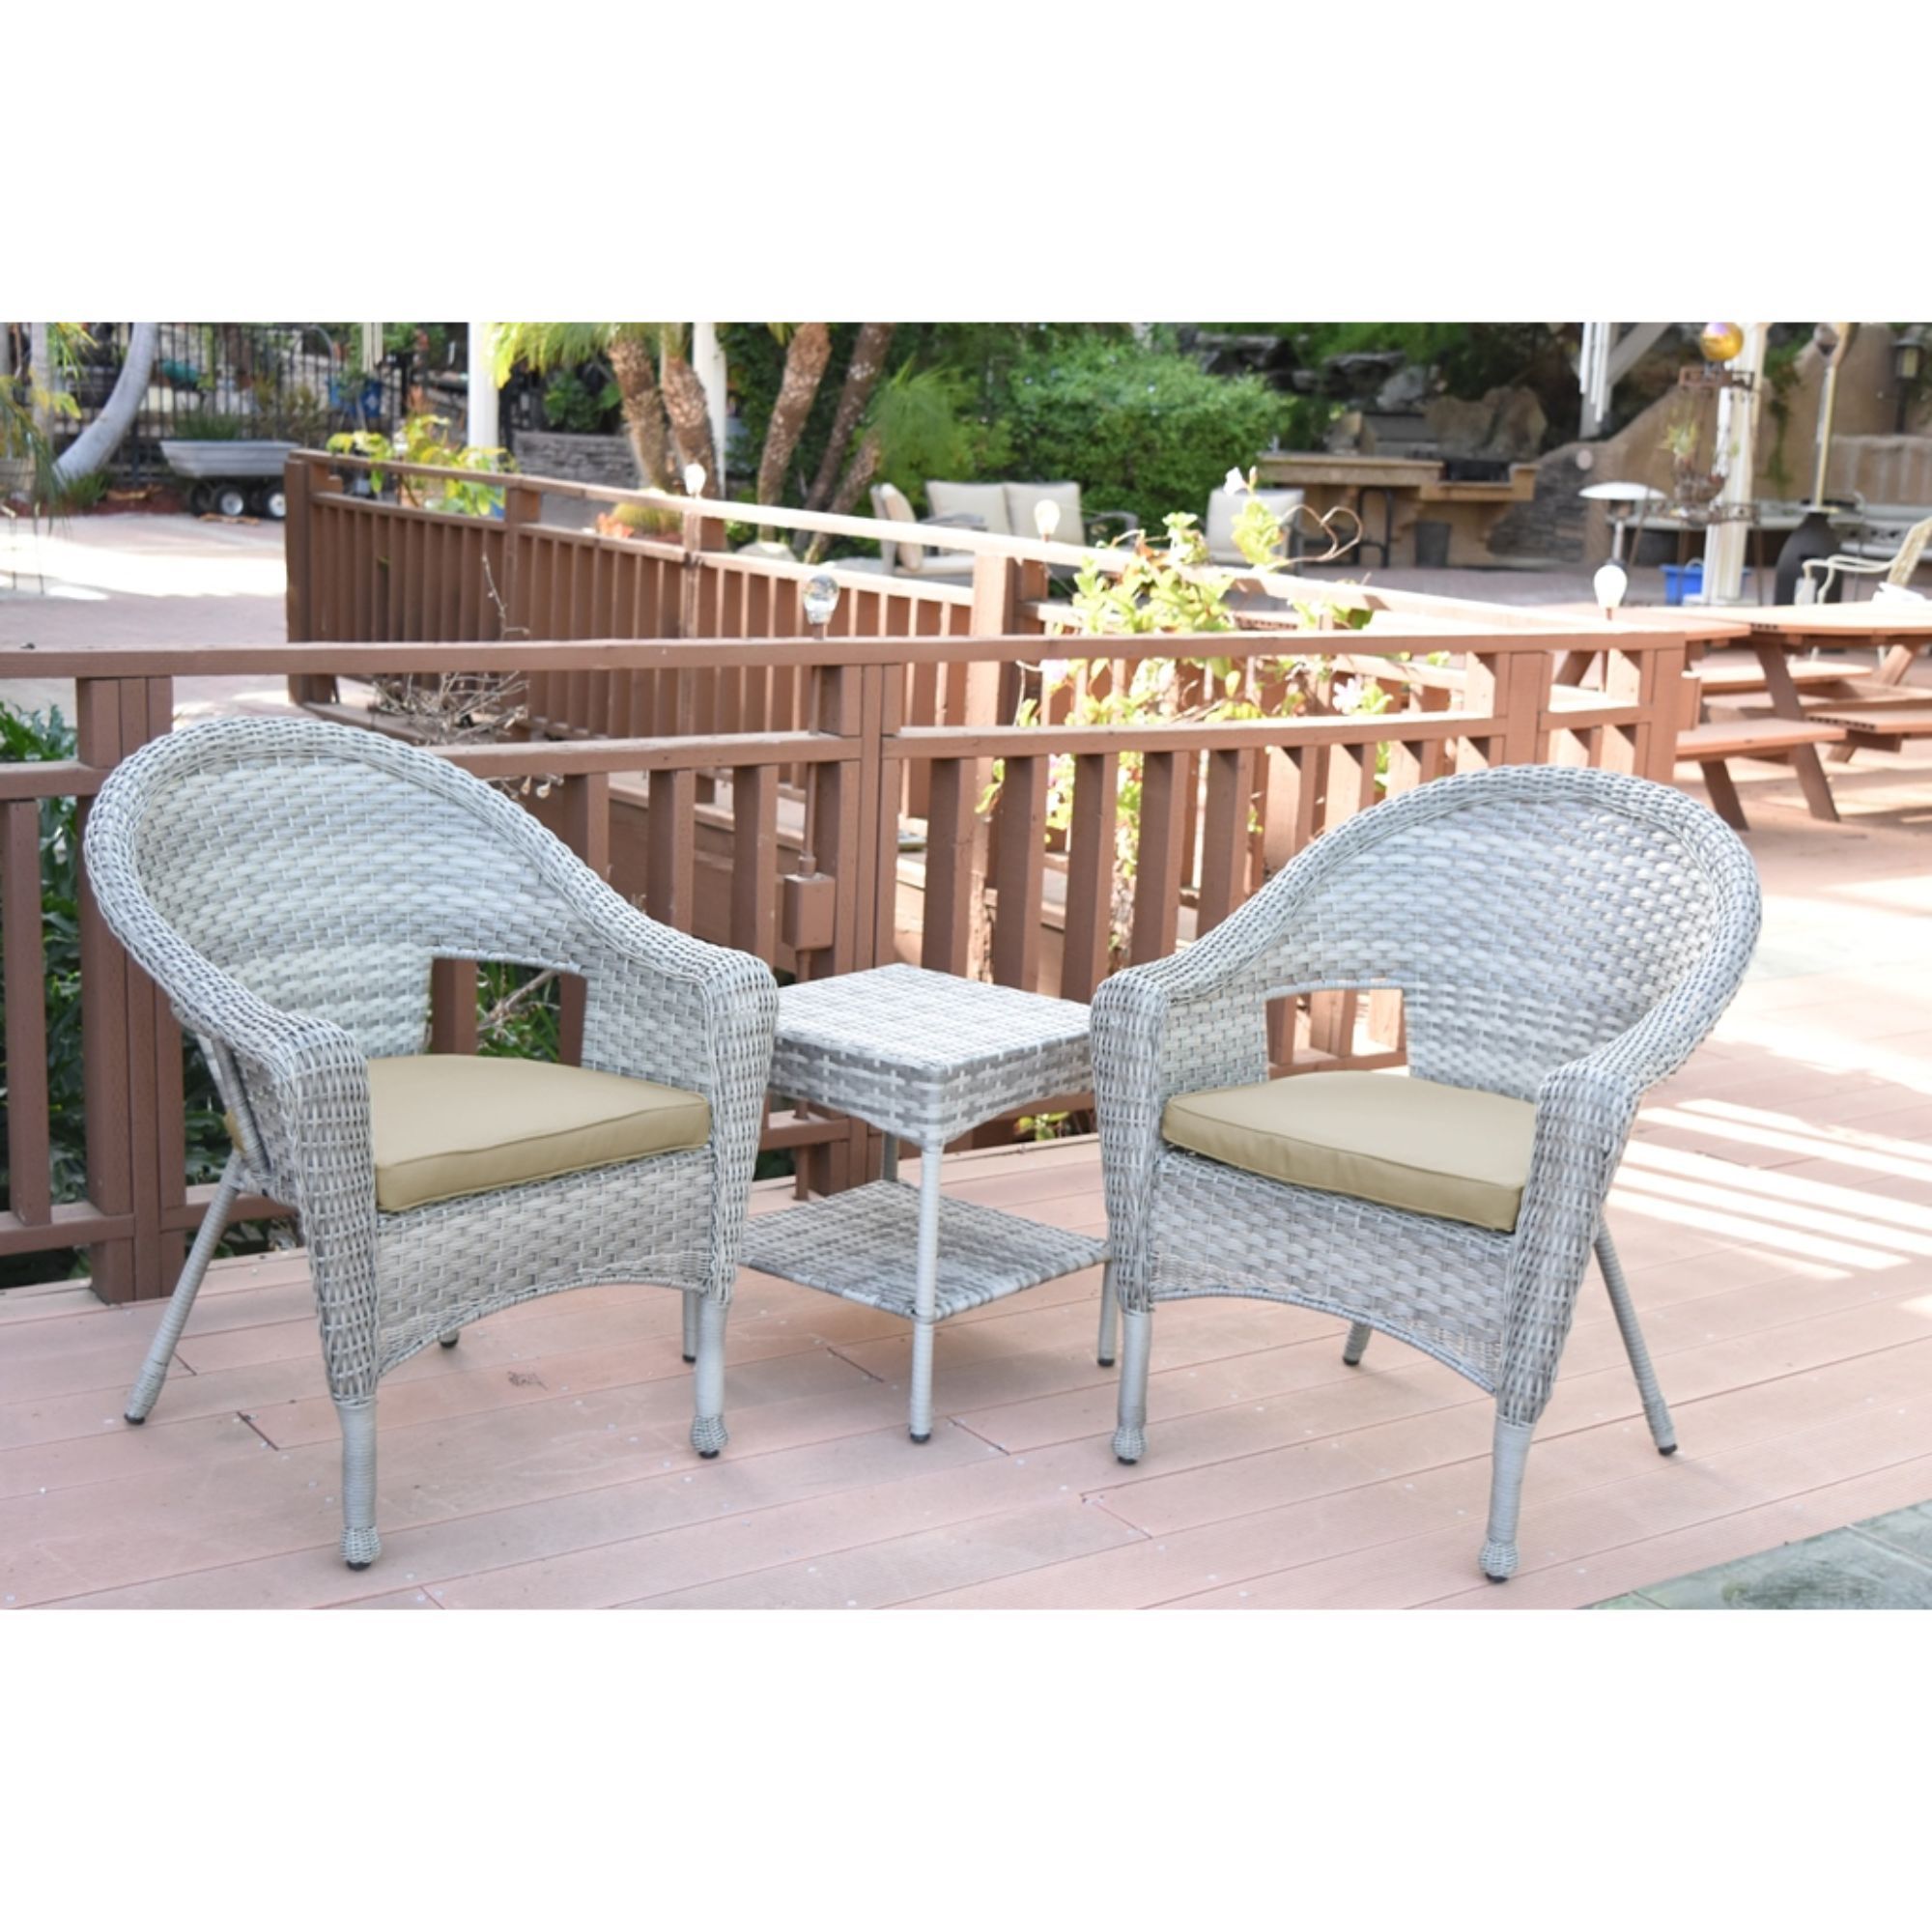 Set Of 3 Gray And Ivory Outdoor Patio Wicker Single Chairs With In Outdoor Wicker Gray Cushion Patio Sets (View 15 of 15)